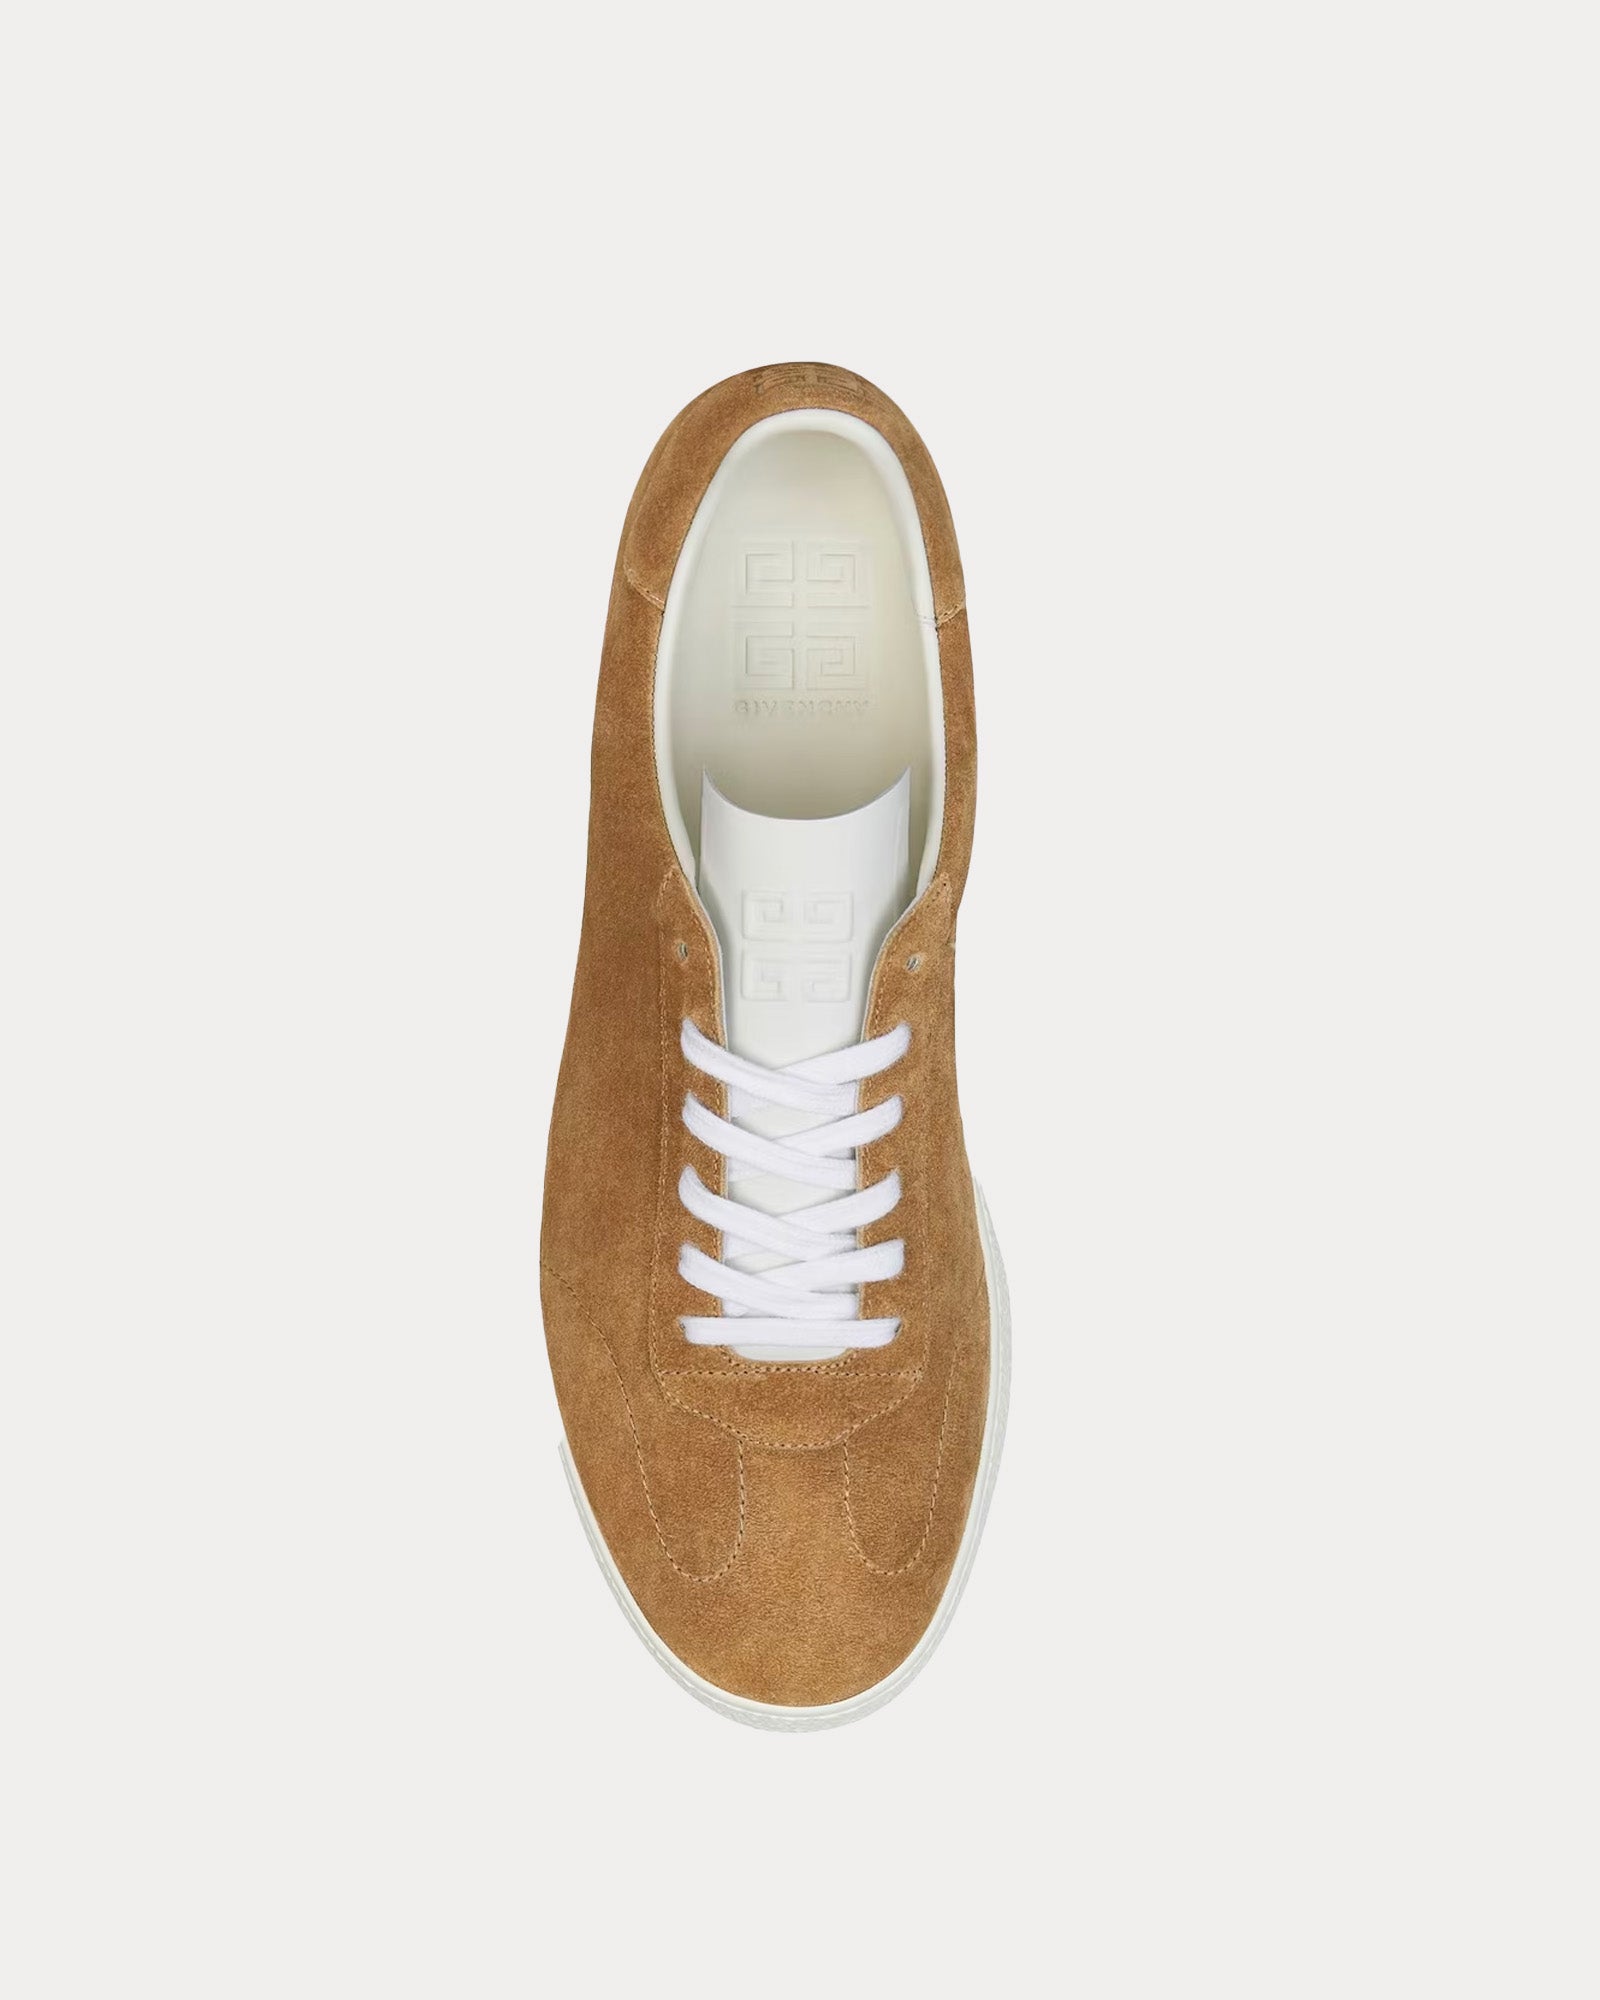 Givenchy - Town Suede Light Brown Low Top Sneakers